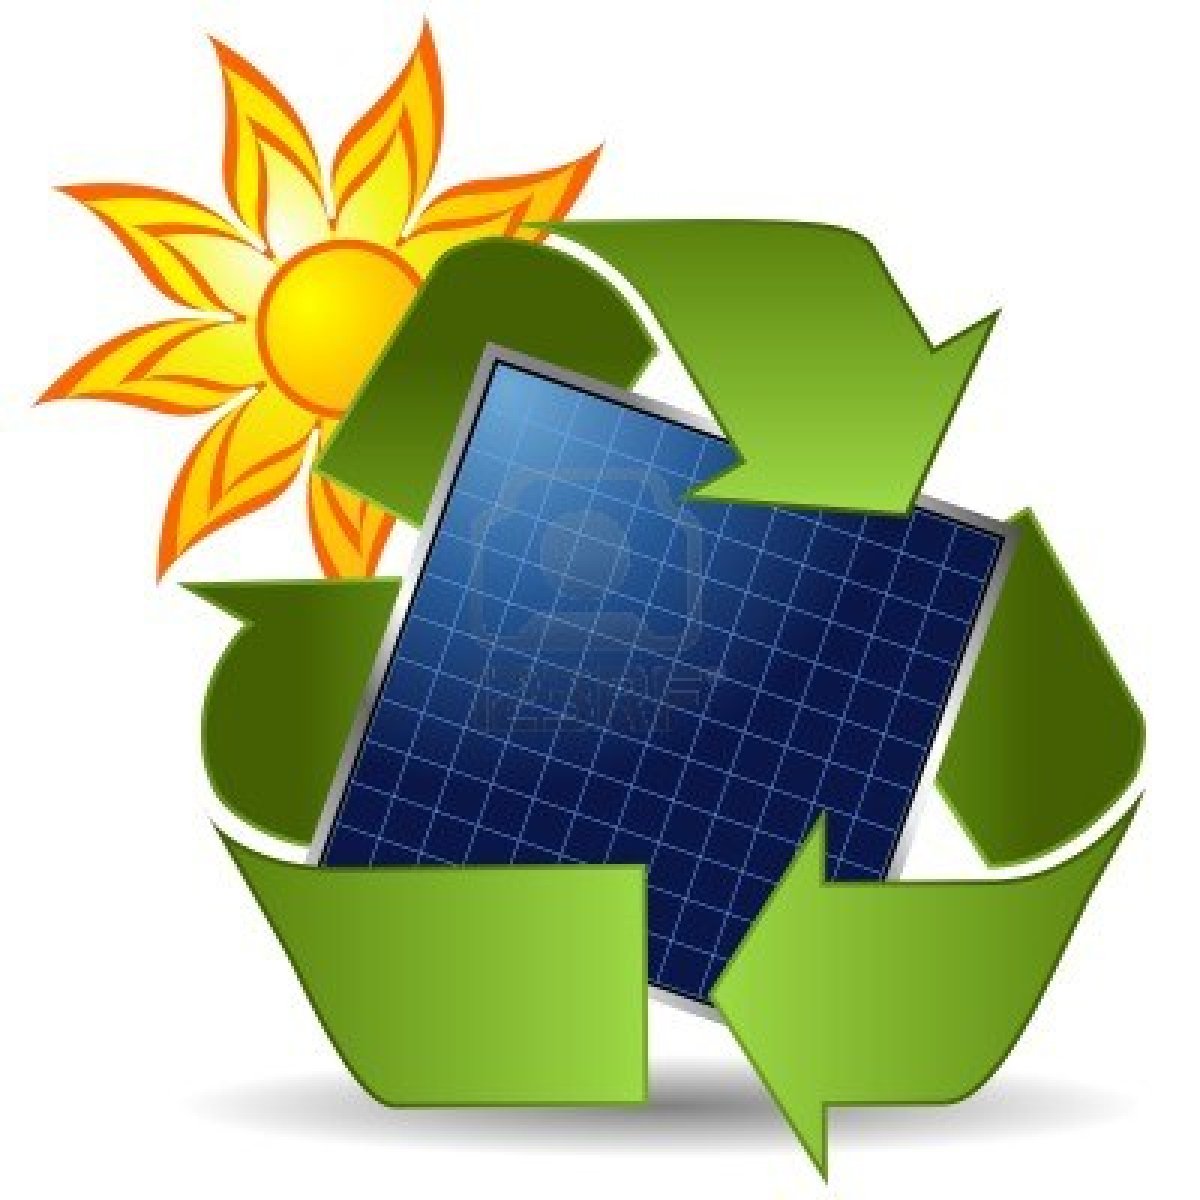 For Providing Customized Solutions For Tapping The Solar Energy